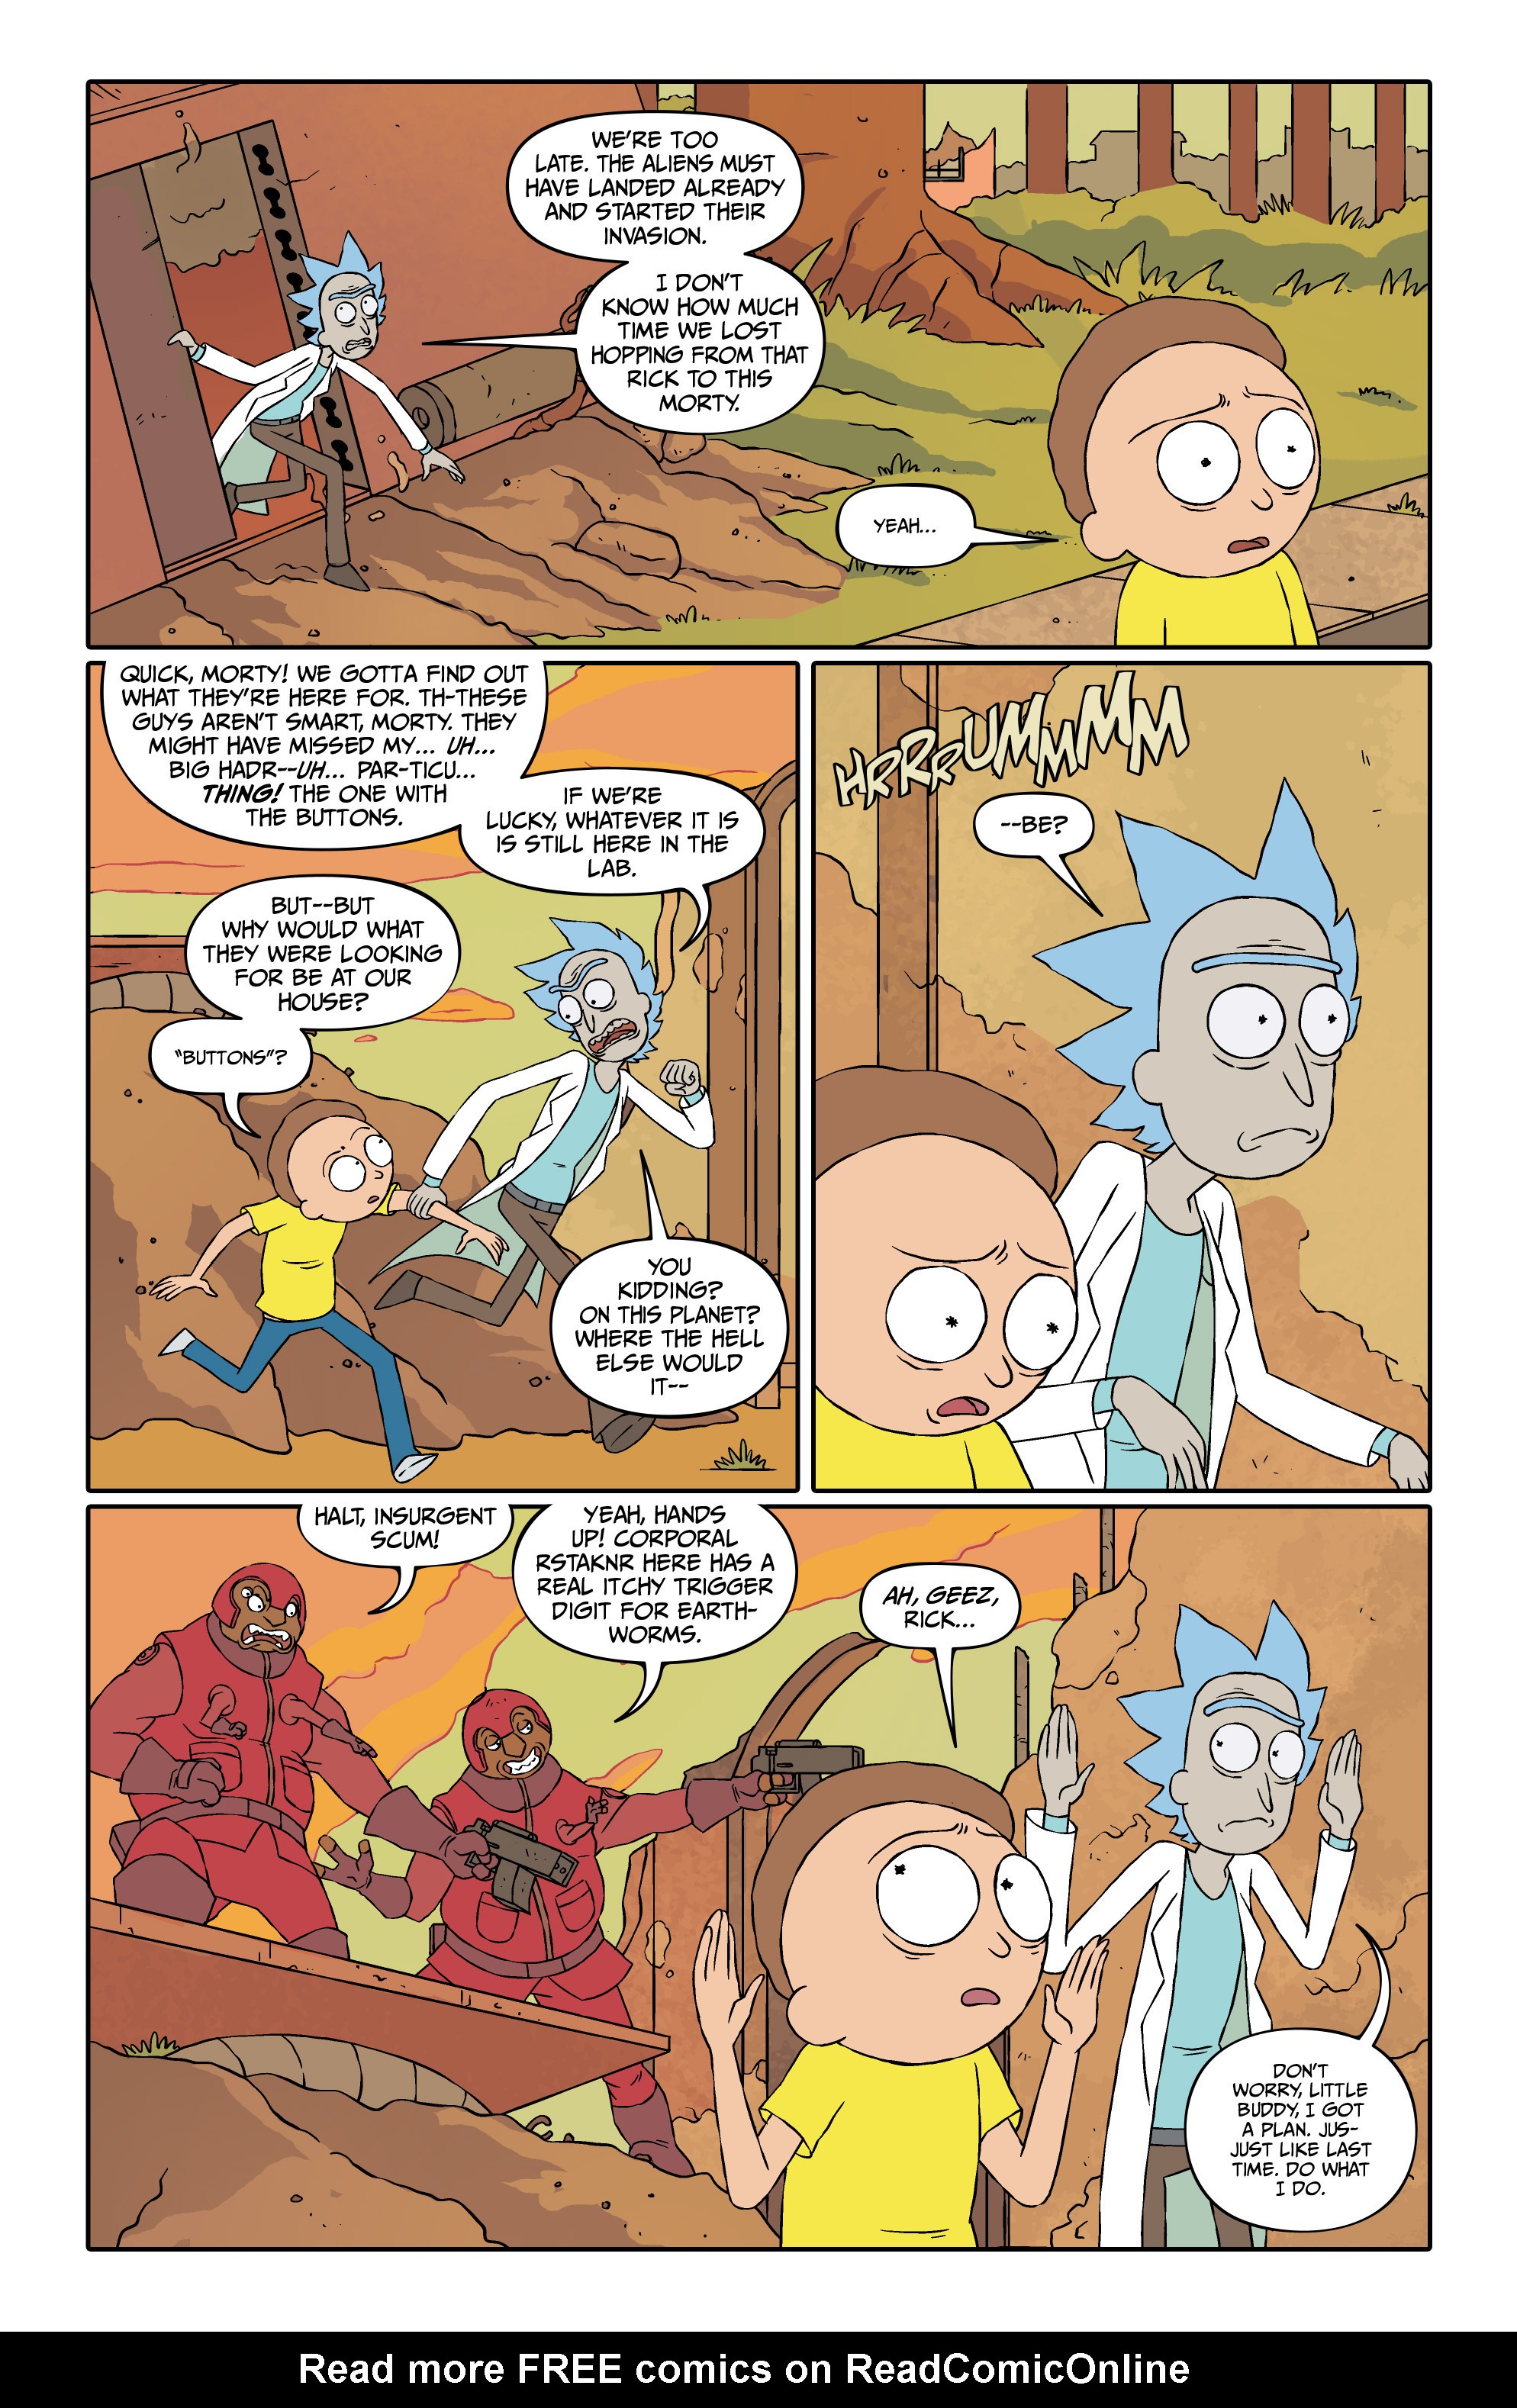 Rick And Morty Issue 13 Read Rick And Morty Issue 13 Comic Online In High Quality Read Full